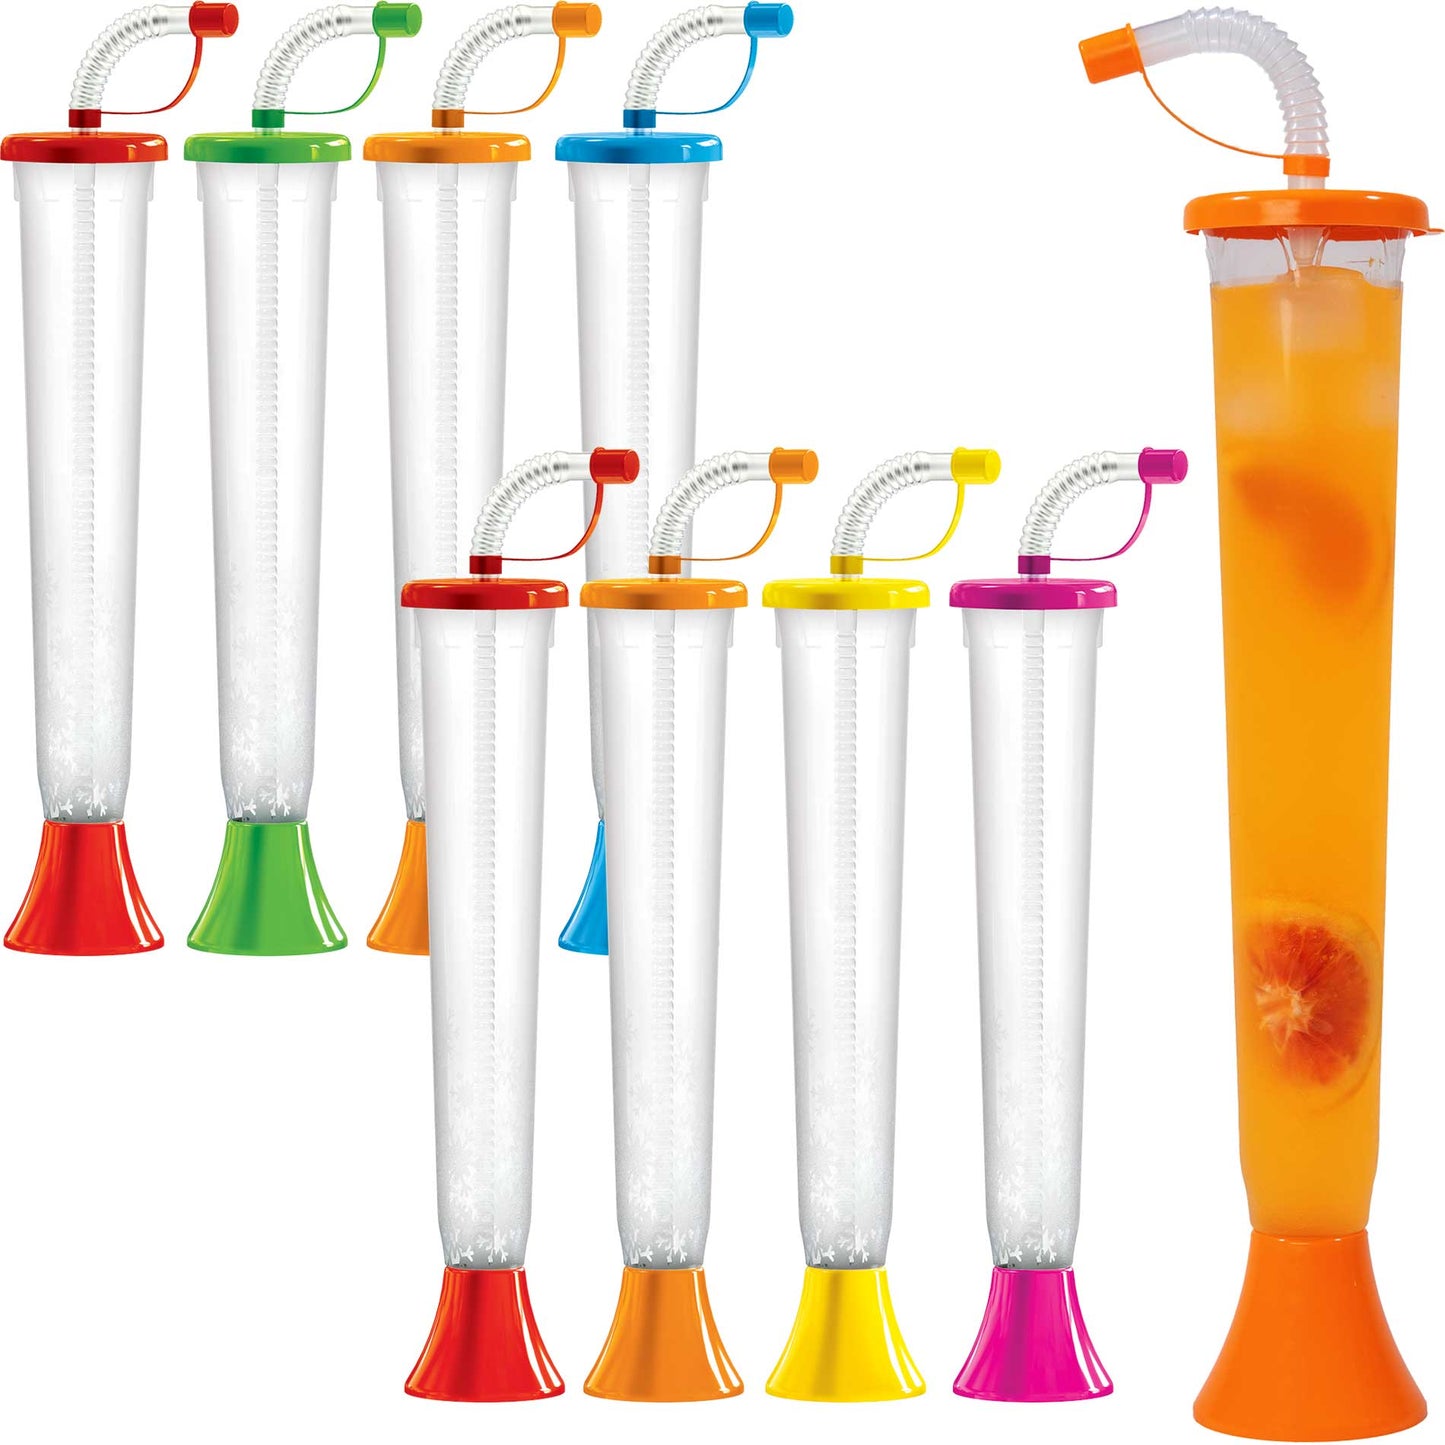 https://noveltycupsusa.com/cdn/shop/files/sweet-world-usa-yard-cups-108-cups-yard-cups-variety-pack-14oz-for-margaritas-and-frozen-drinks-sw-40000f-v-cups-with-lids-and-straws-35523466199199.jpg?v=1684776397&width=1445